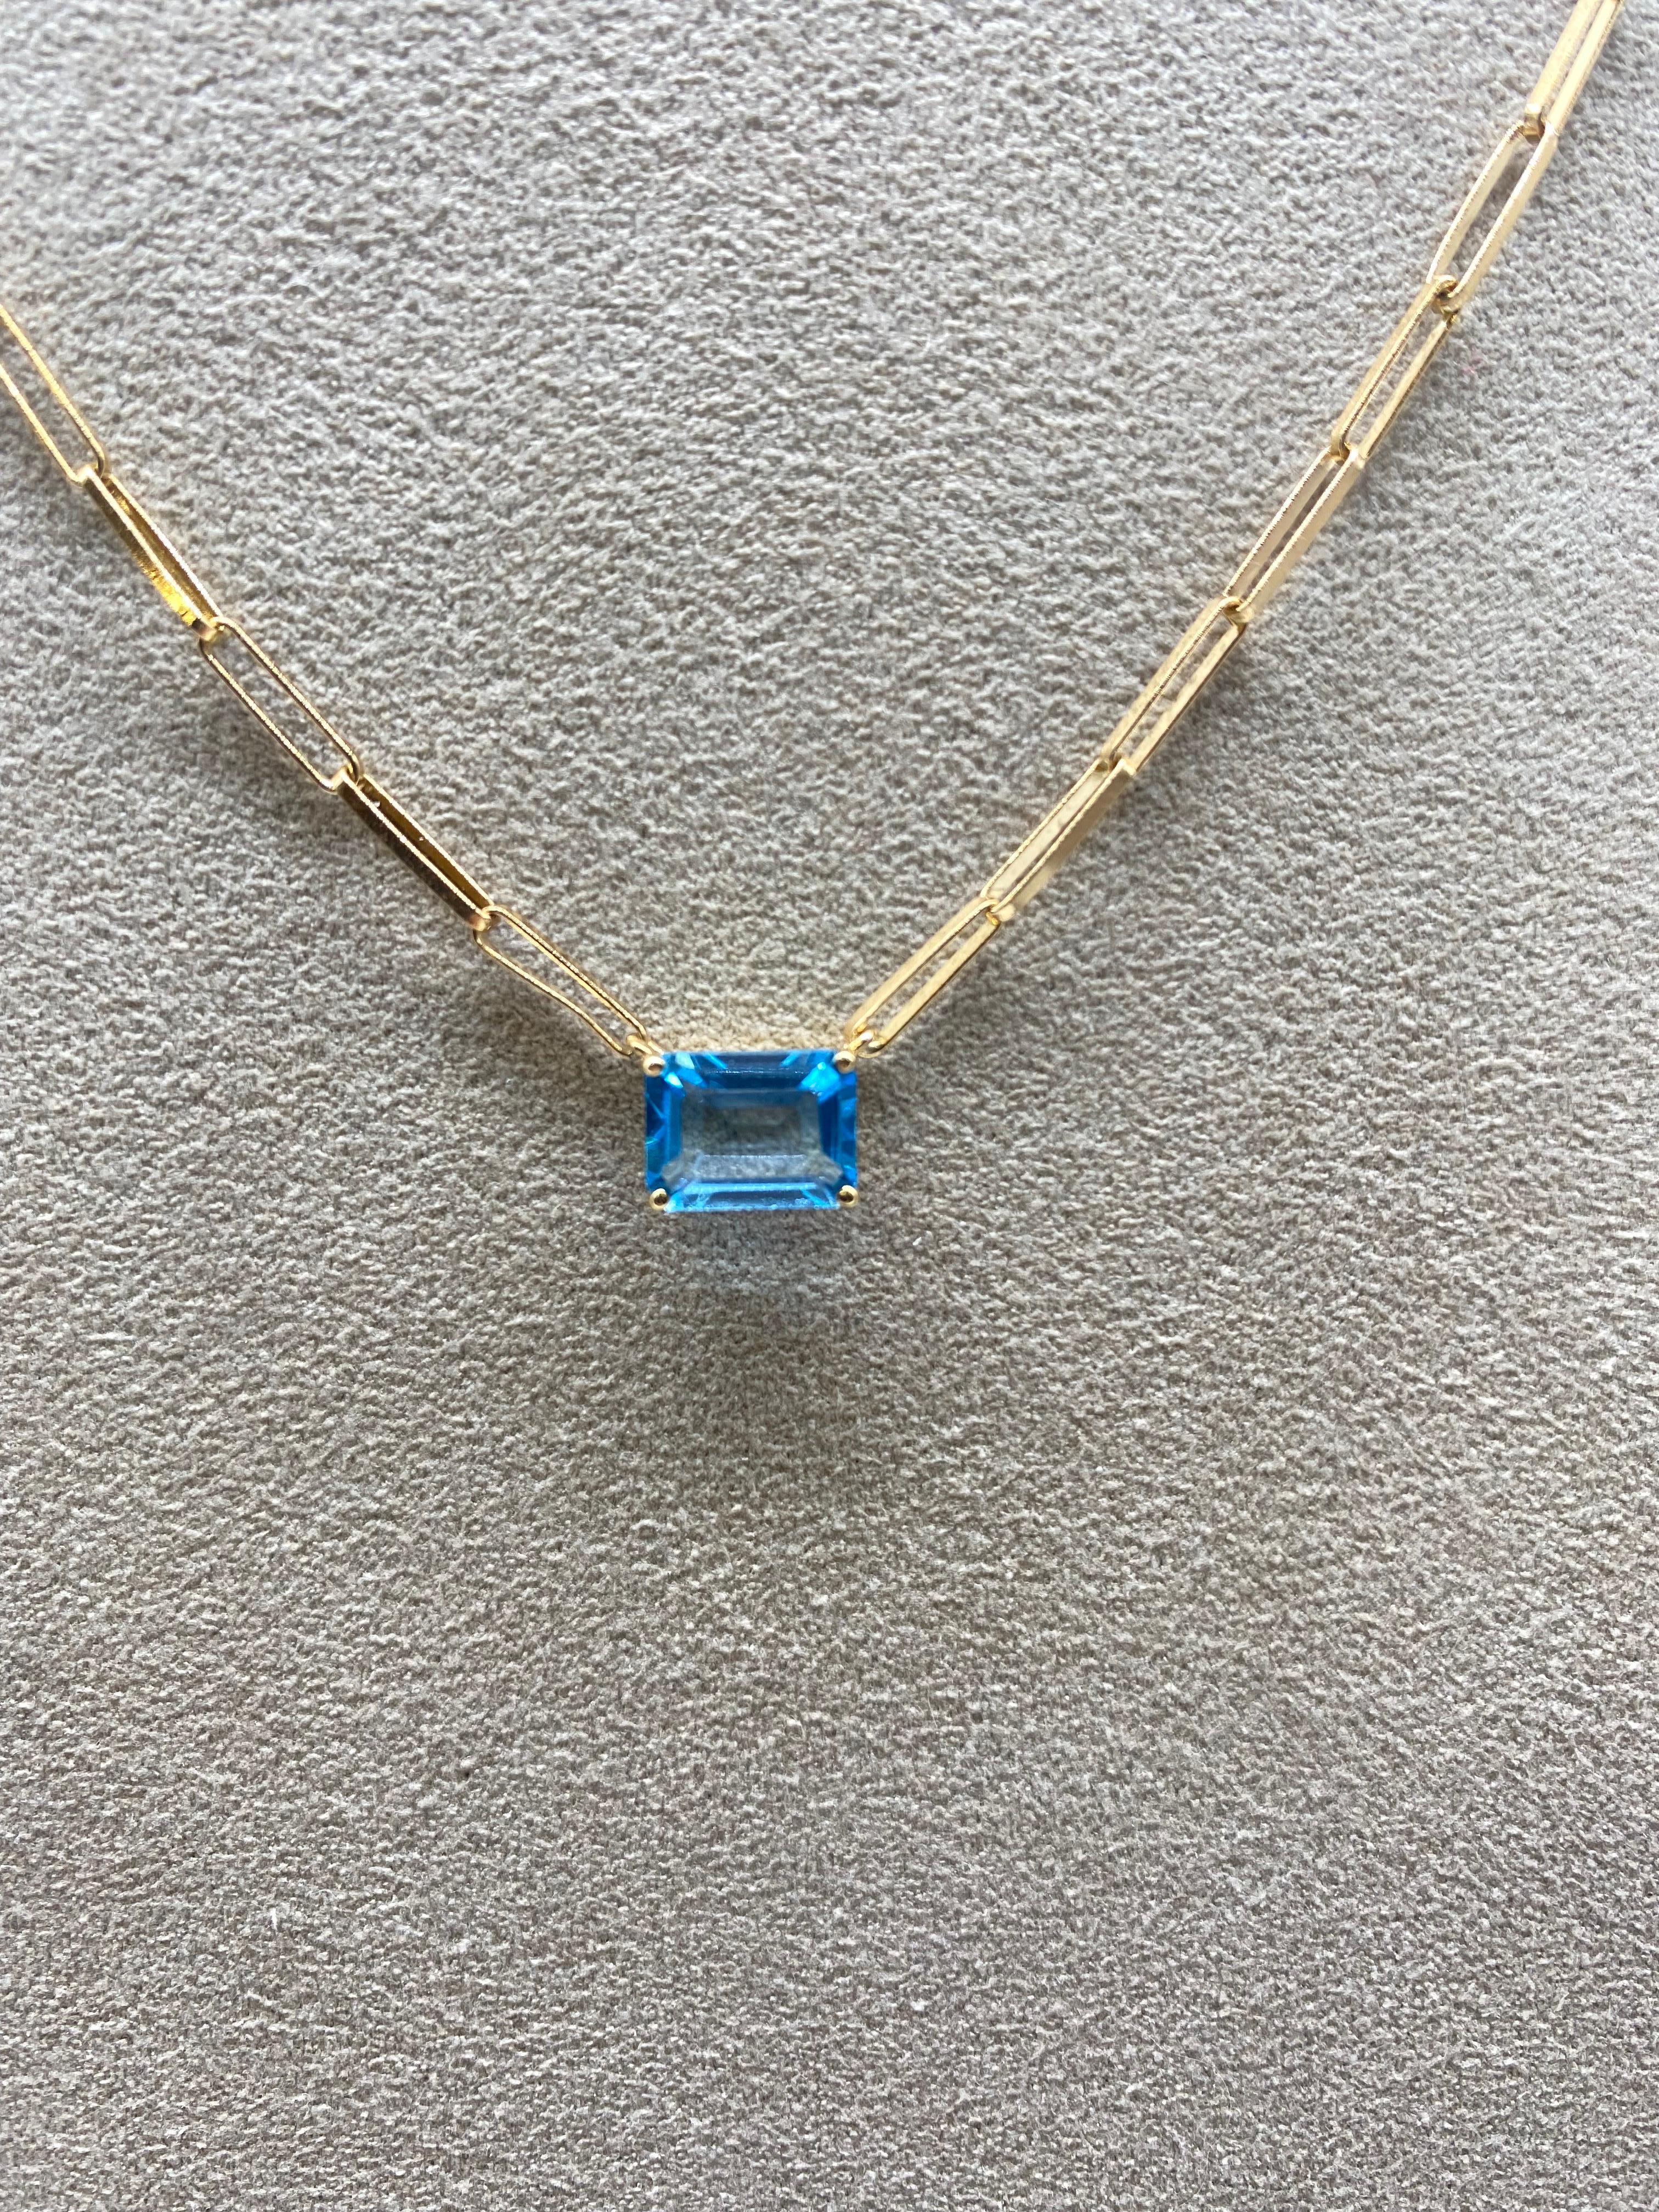 we are delighted to present this magnificent straight Mech necklace in 18-carat yellow gold, adorned with an elegant RPC-cut blue quartz, a unique piece that will add a touch of color and refinement to your ensemble.

This 18-carat yellow gold